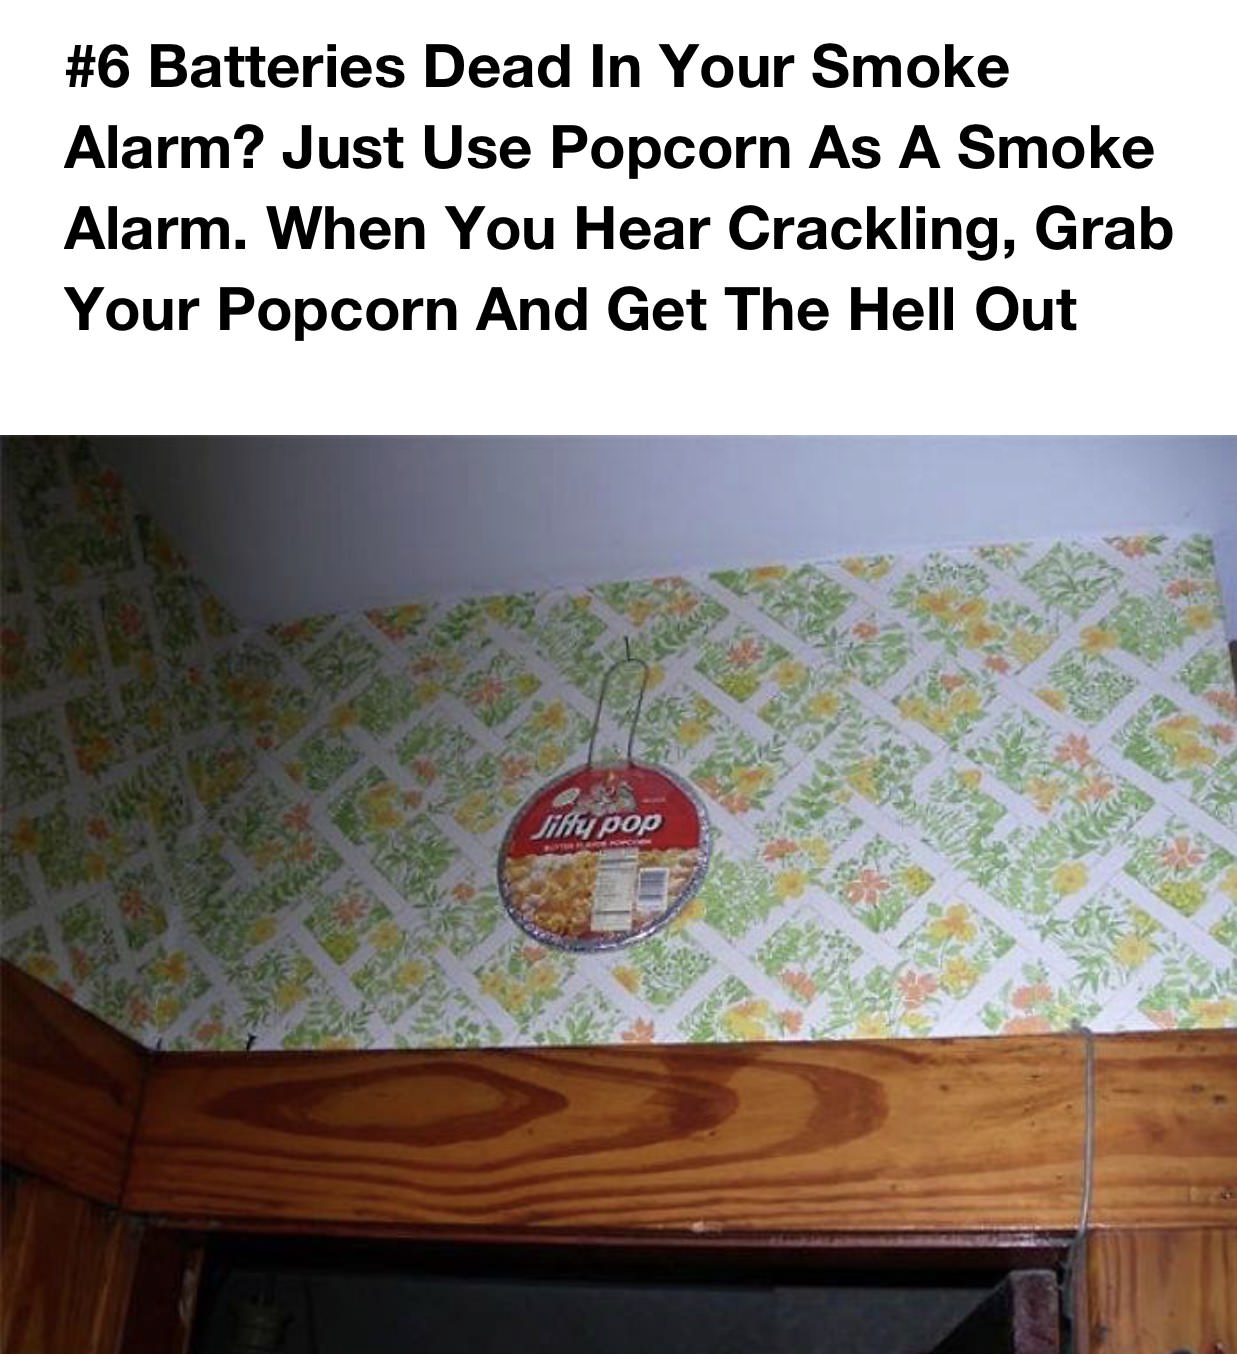 redneck fire alarm - Batteries Dead In Your Smoke Alarm? Just Use Popcorn As A Smoke Alarm. When You Hear Crackling, Grab Your Popcorn And Get The Hell Out Jiffy pop